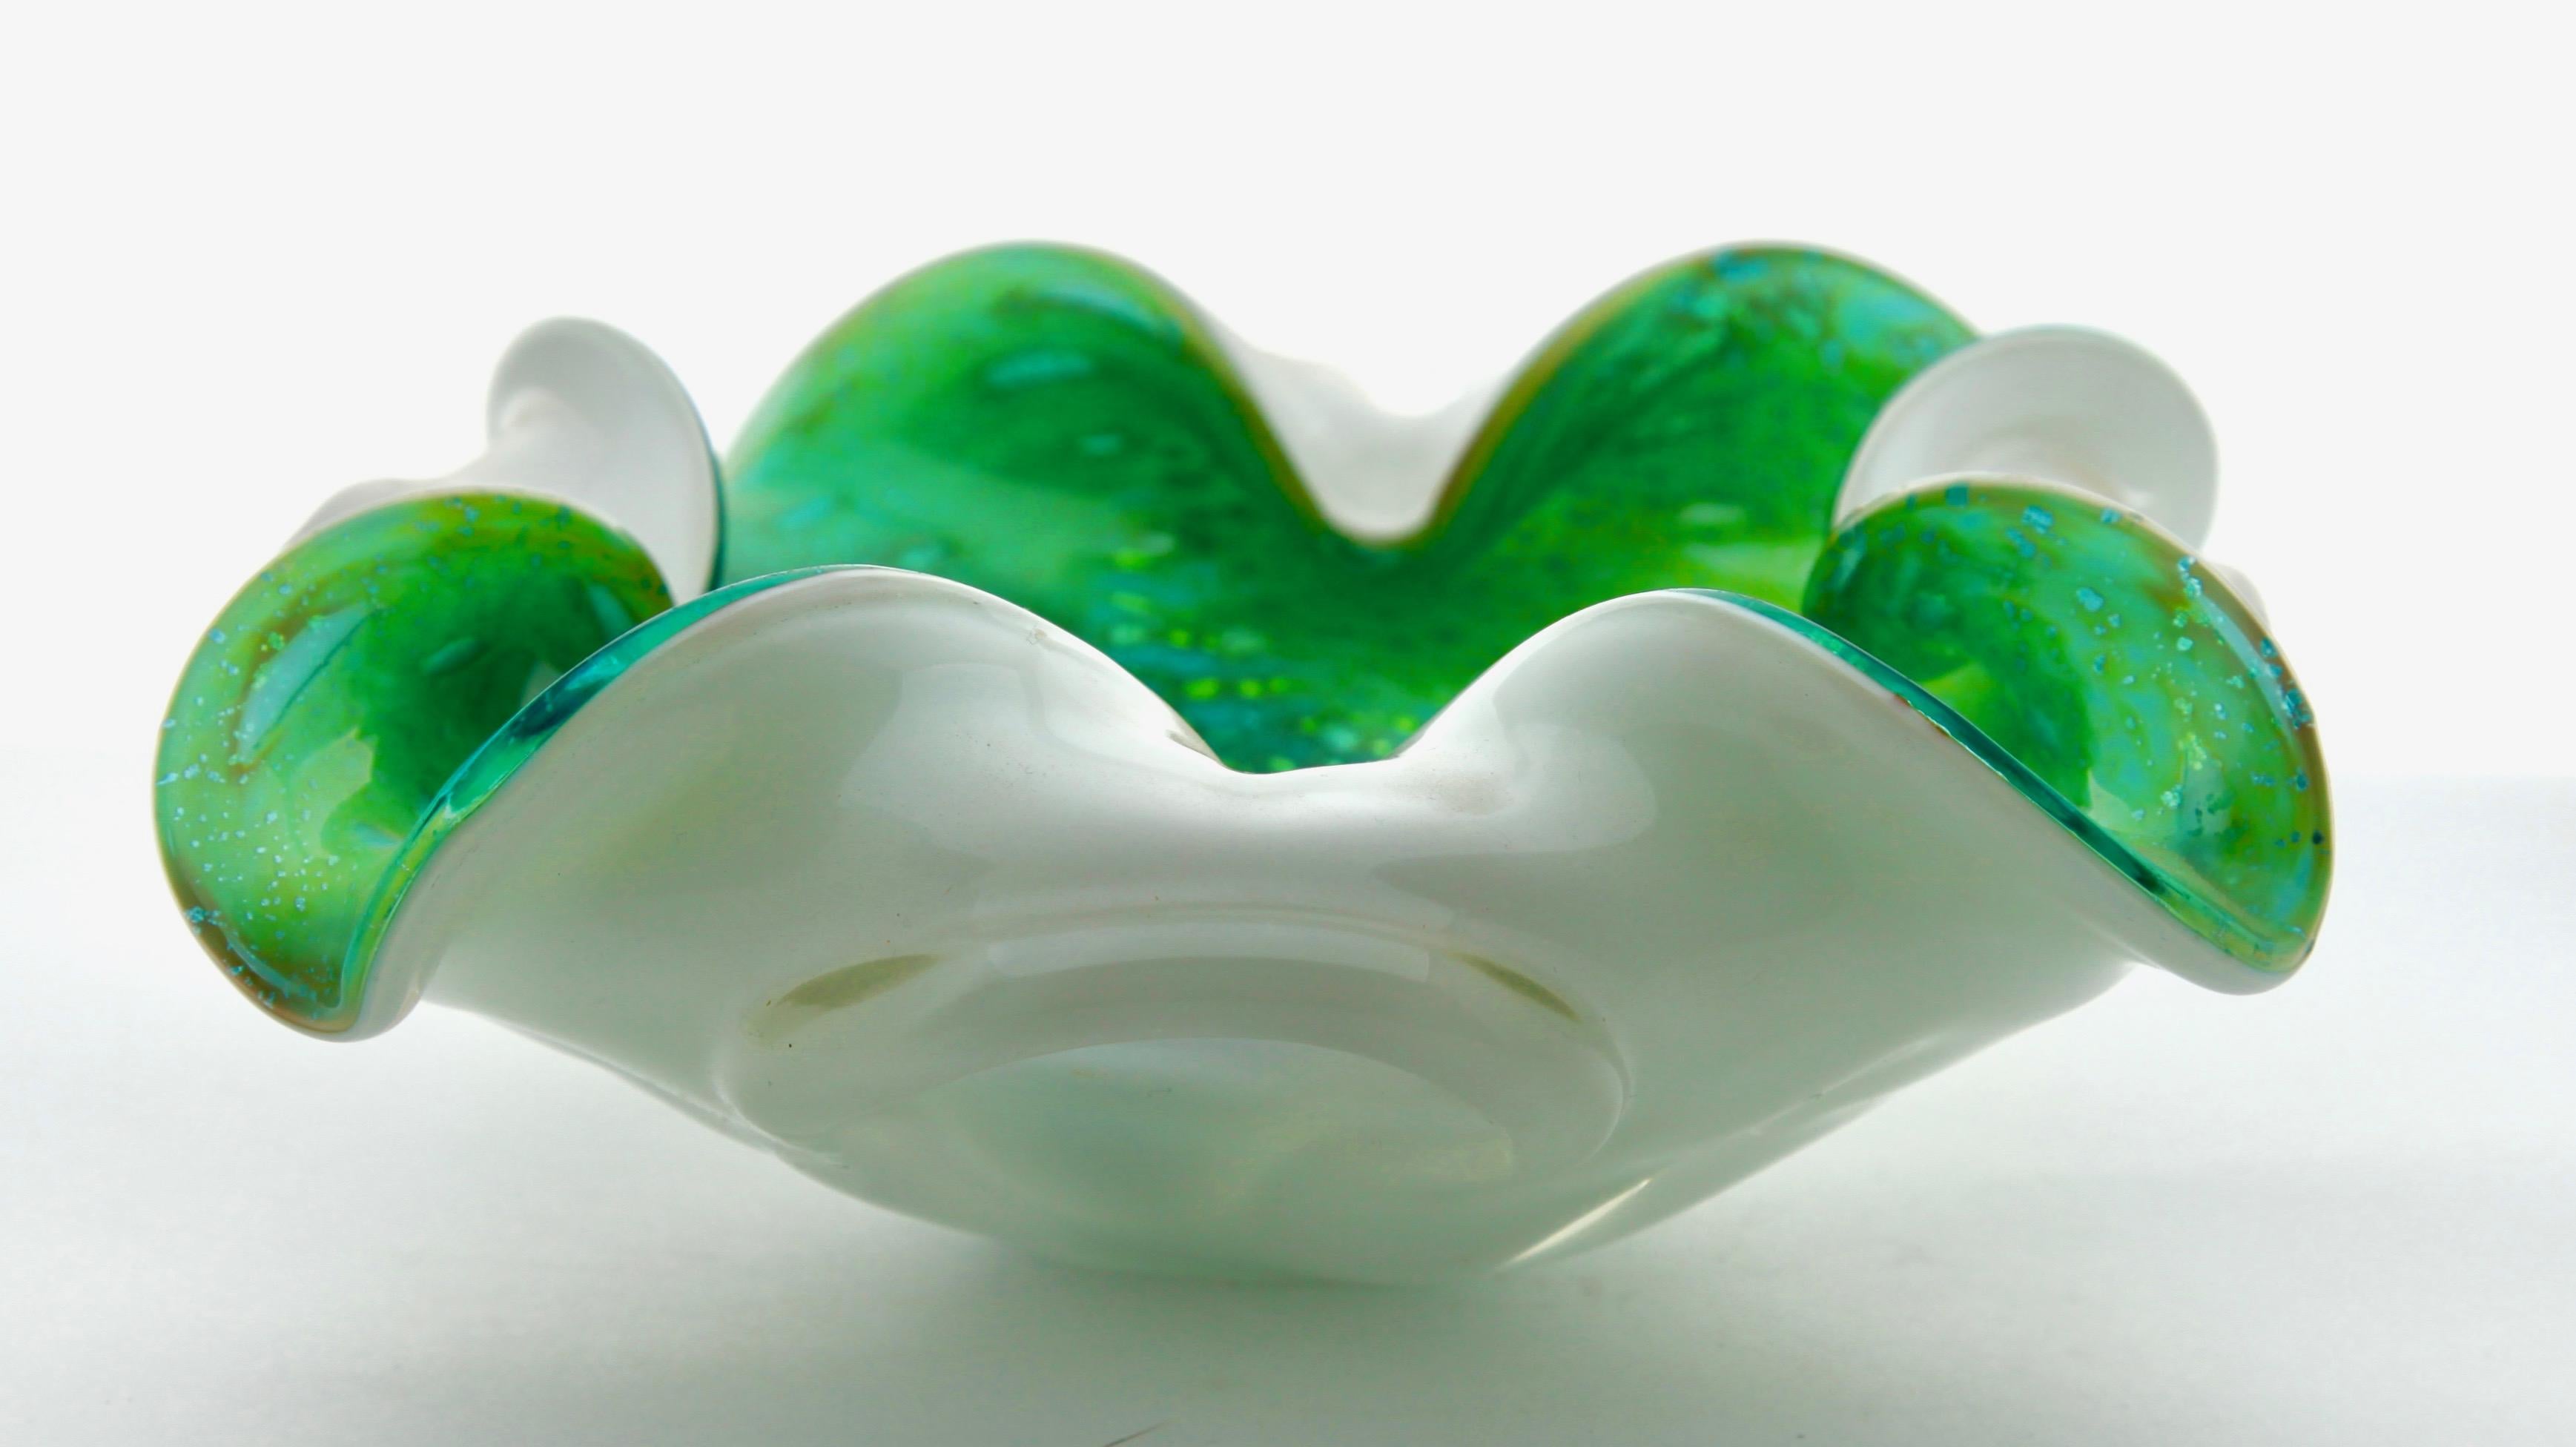 Four-lobed shell bowl with opaline casing.
In the Seguso style, this biomorphic four-lobed Murano glass bowl is handcrafted with an inner bowl in bright green and cased in an opaque white (opaline) casing, the controlled bubbles swirl up from the